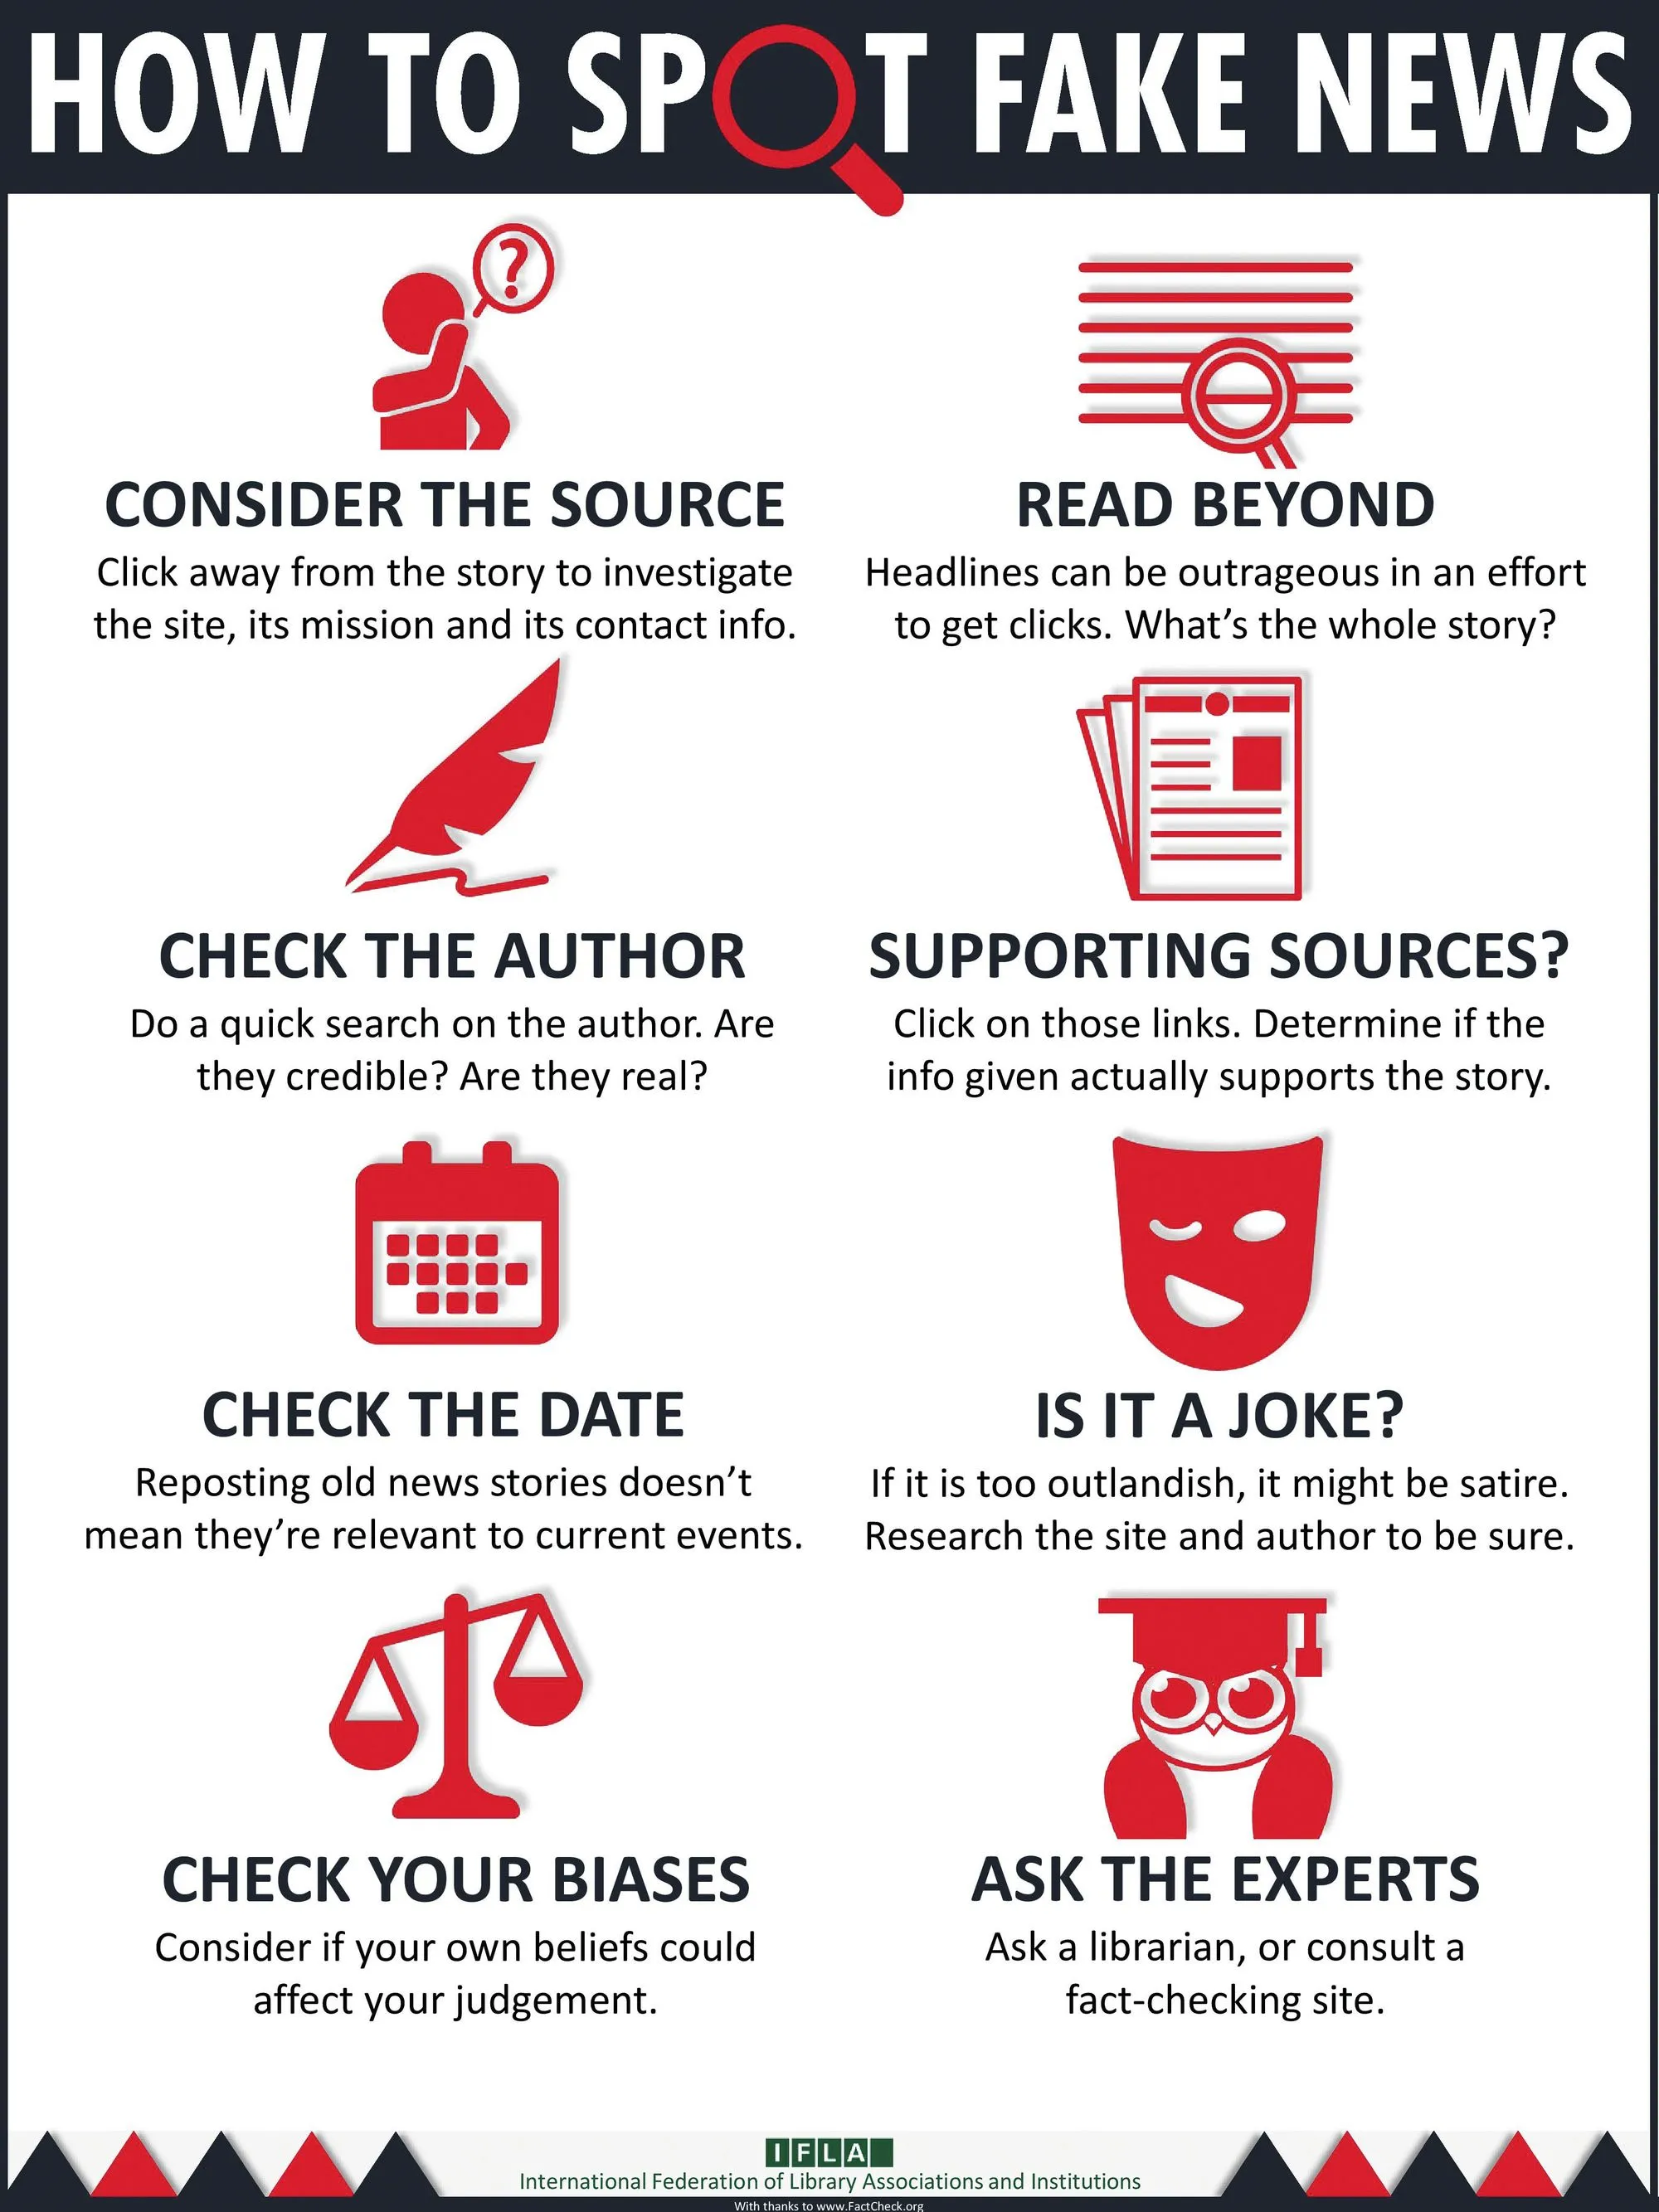 “How to Spot Fake News”, IFLA.org, 2017.